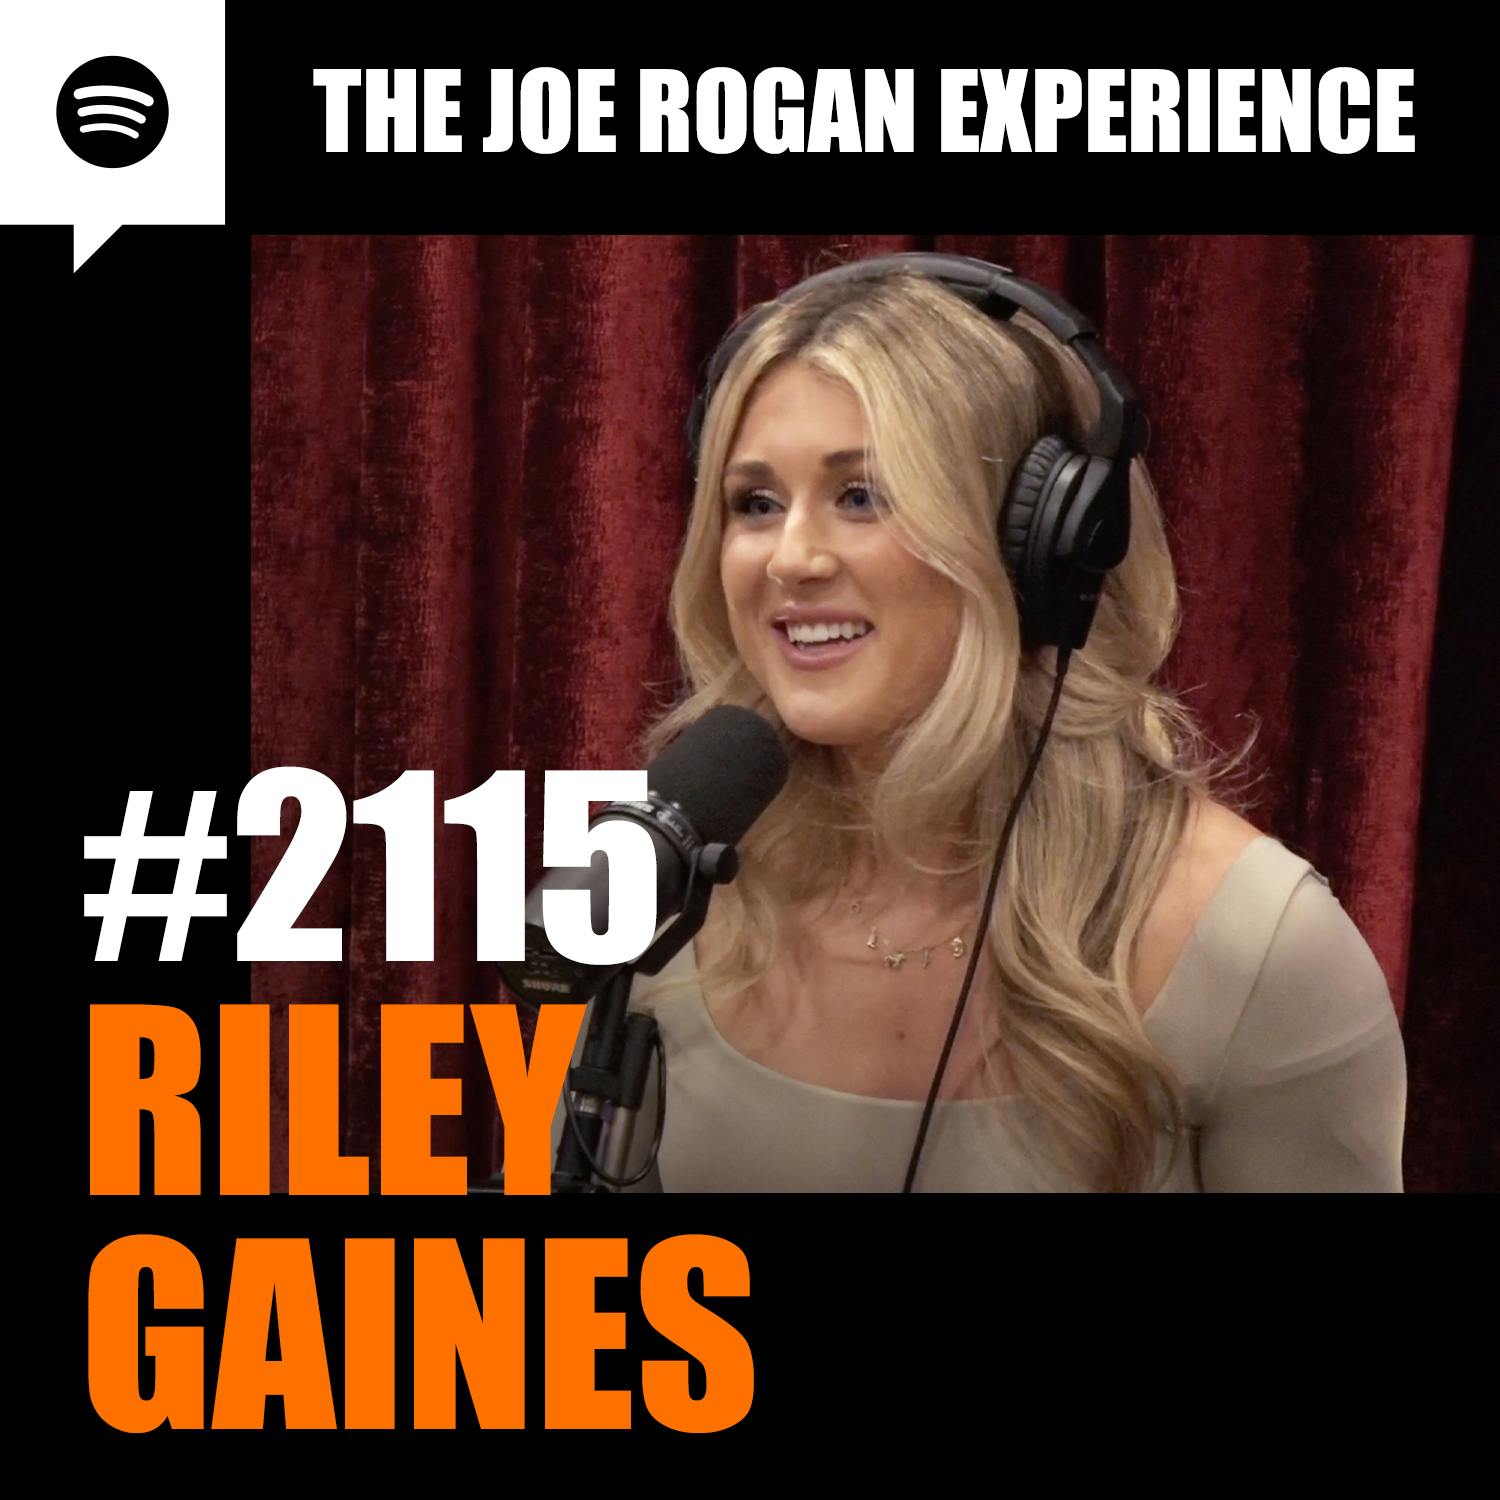 #2115 - Riley Gaines